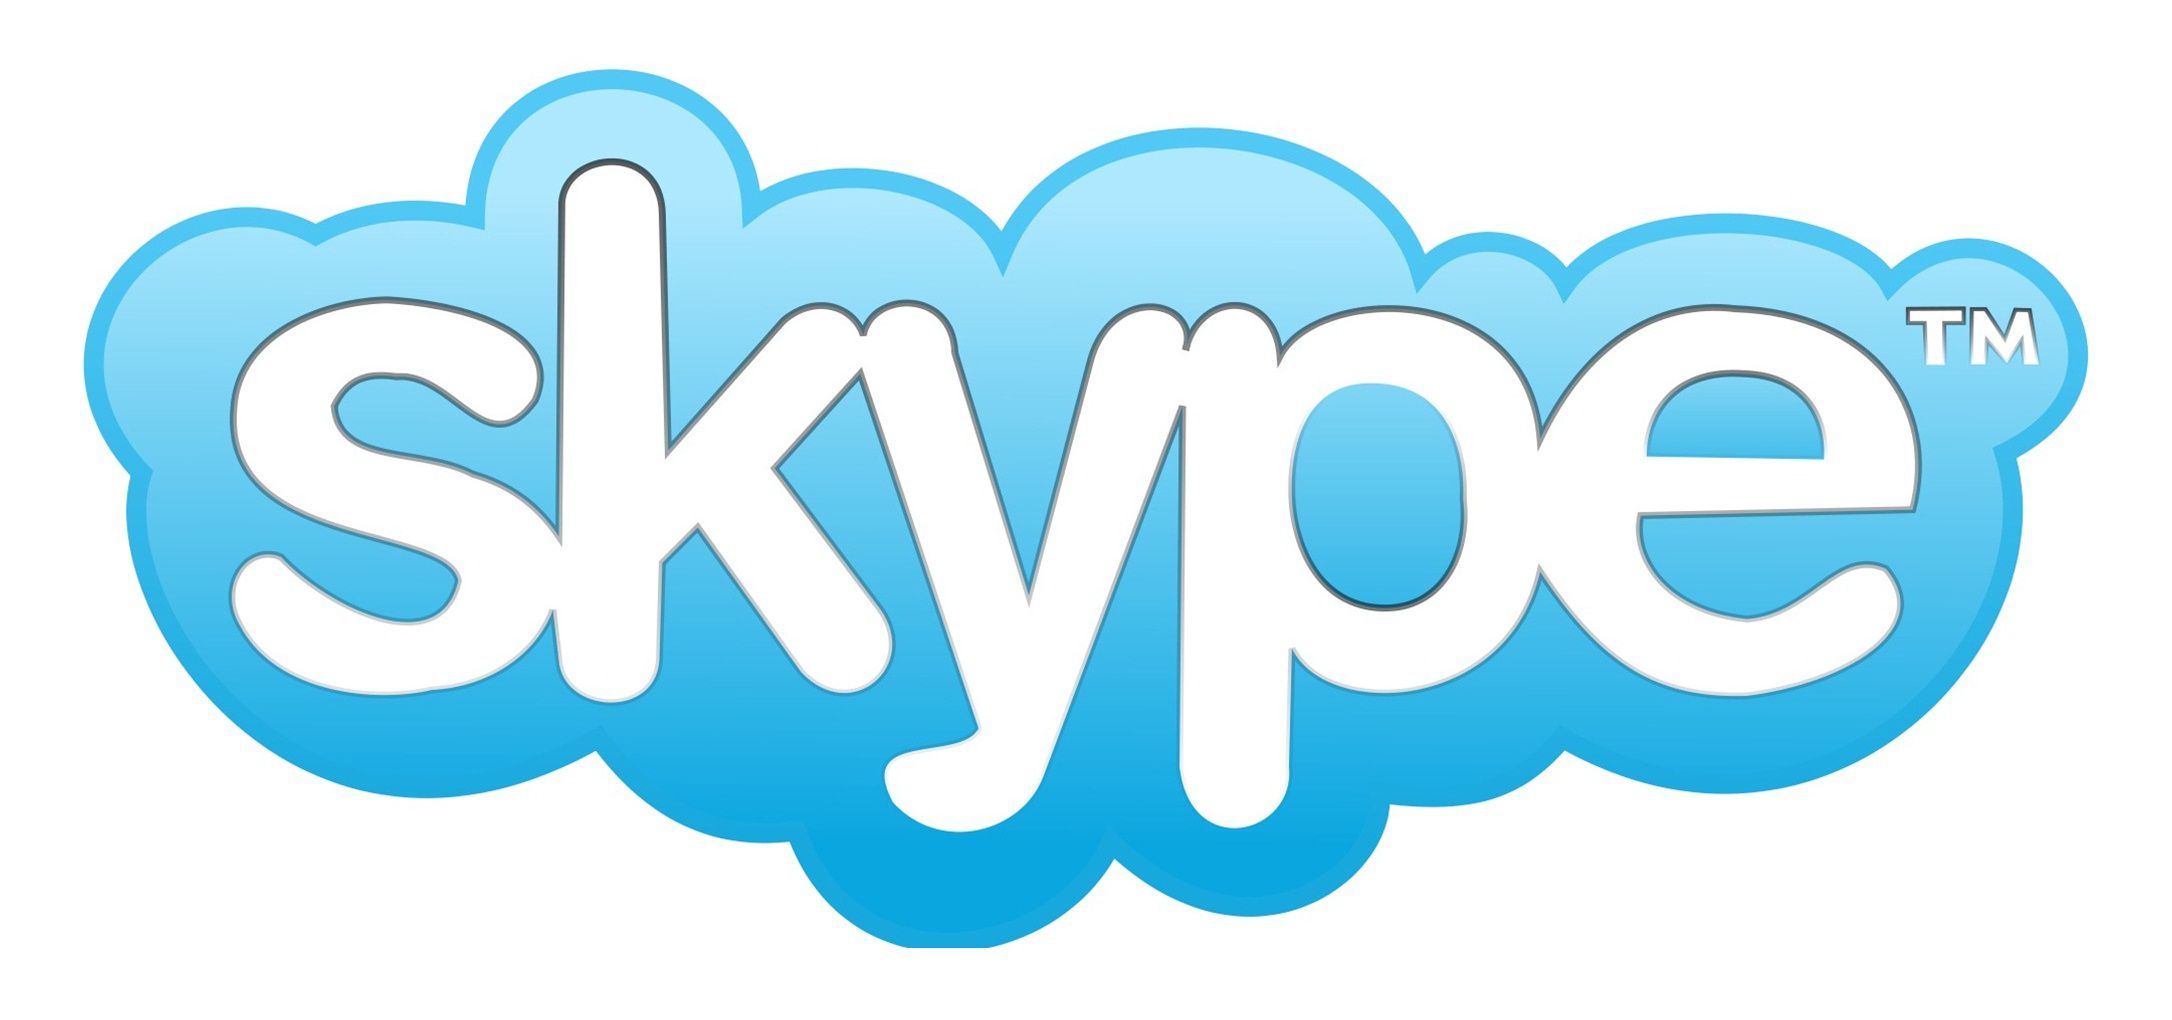 Why All The Hype About Skype?